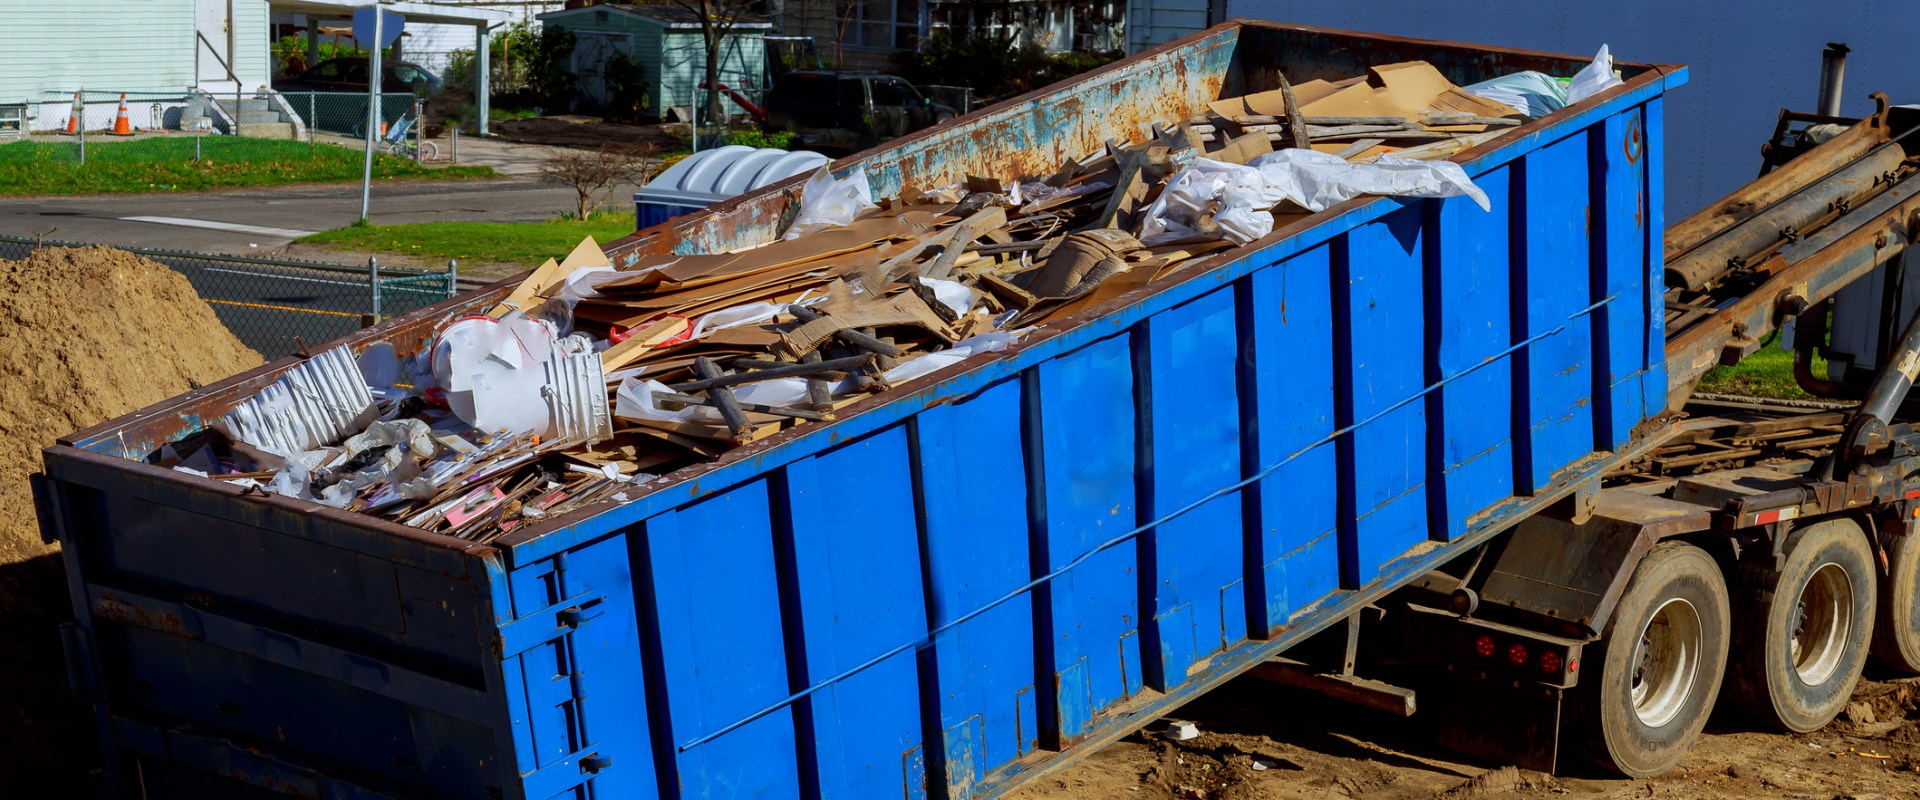 How A Junk Removal Service Can Help With Trash Removal For Civil Engineering Projects In Boise